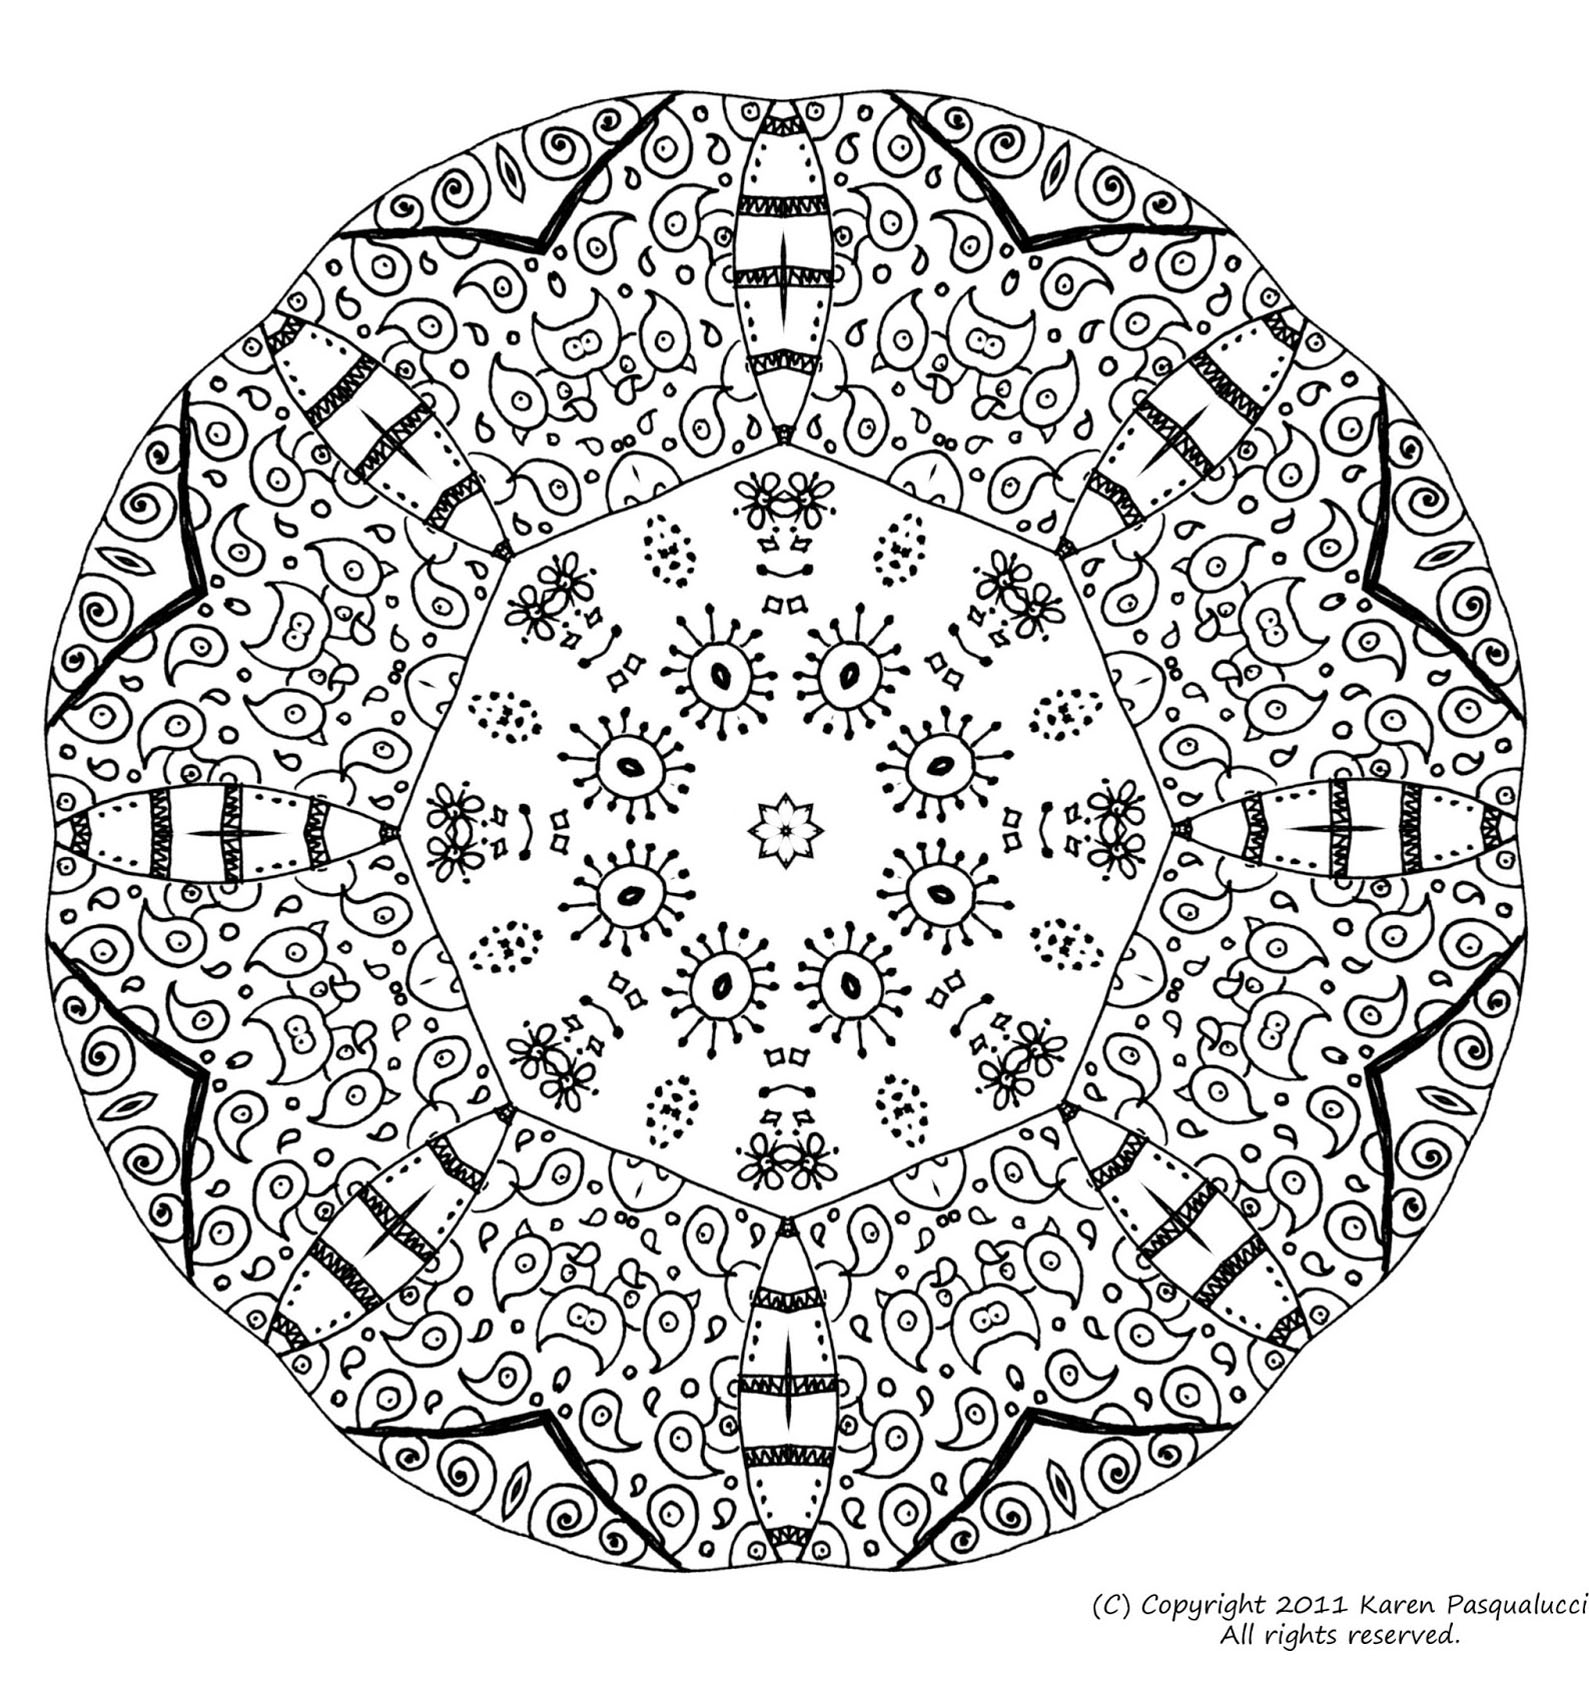 Mandala for adult fairly complex, with high level of detail